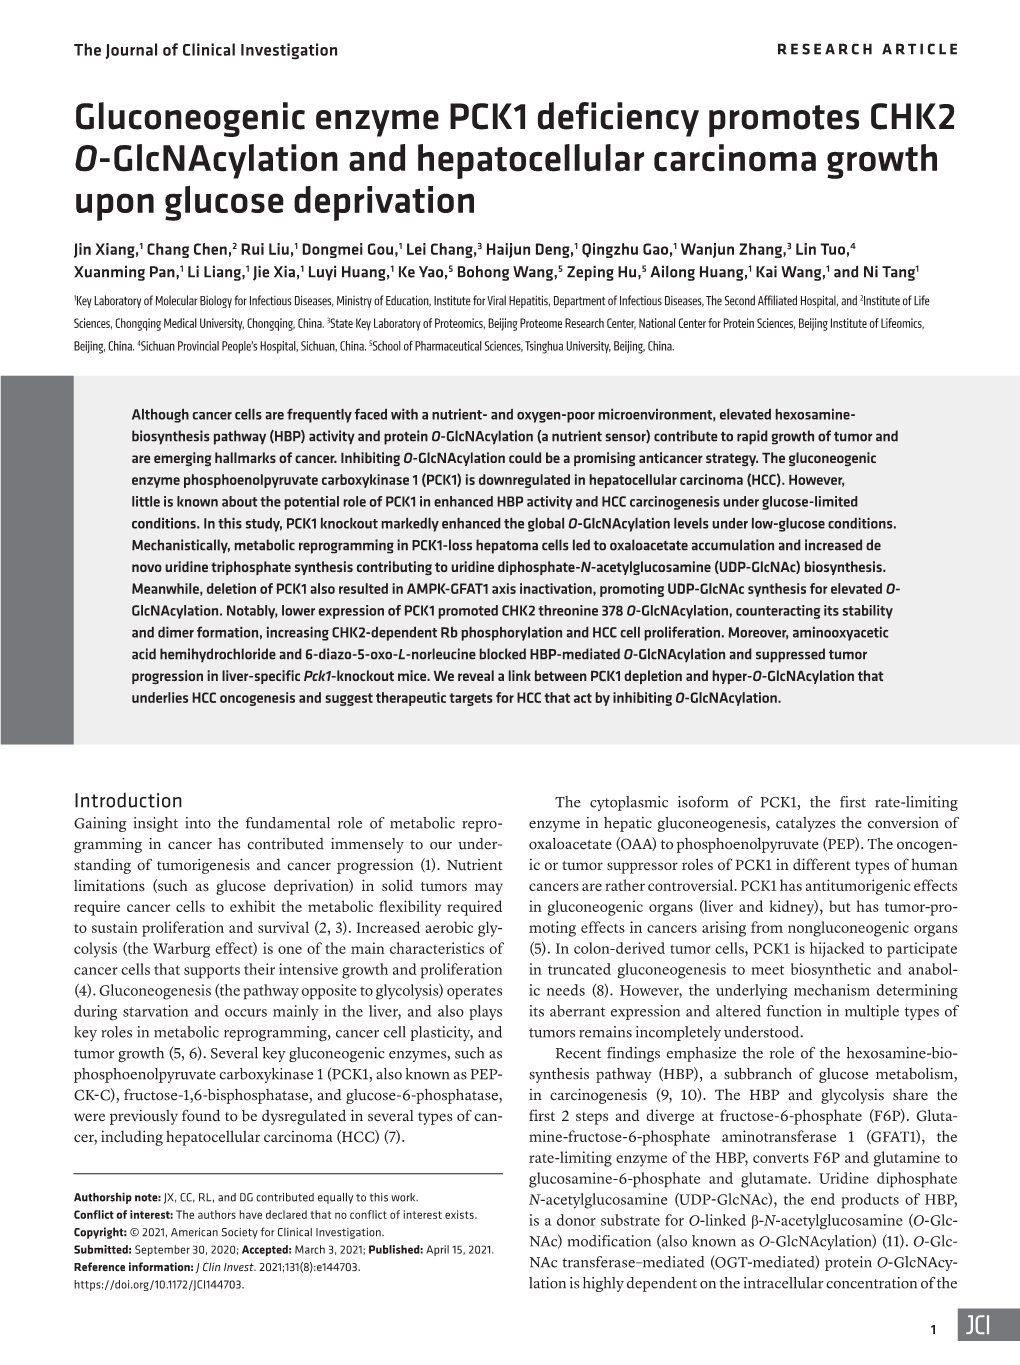 Gluconeogenic Enzyme PCK1 Deficiency Promotes CHK2 O-Glcnacylation and Hepatocellular Carcinoma Growth Upon Glucose Deprivation